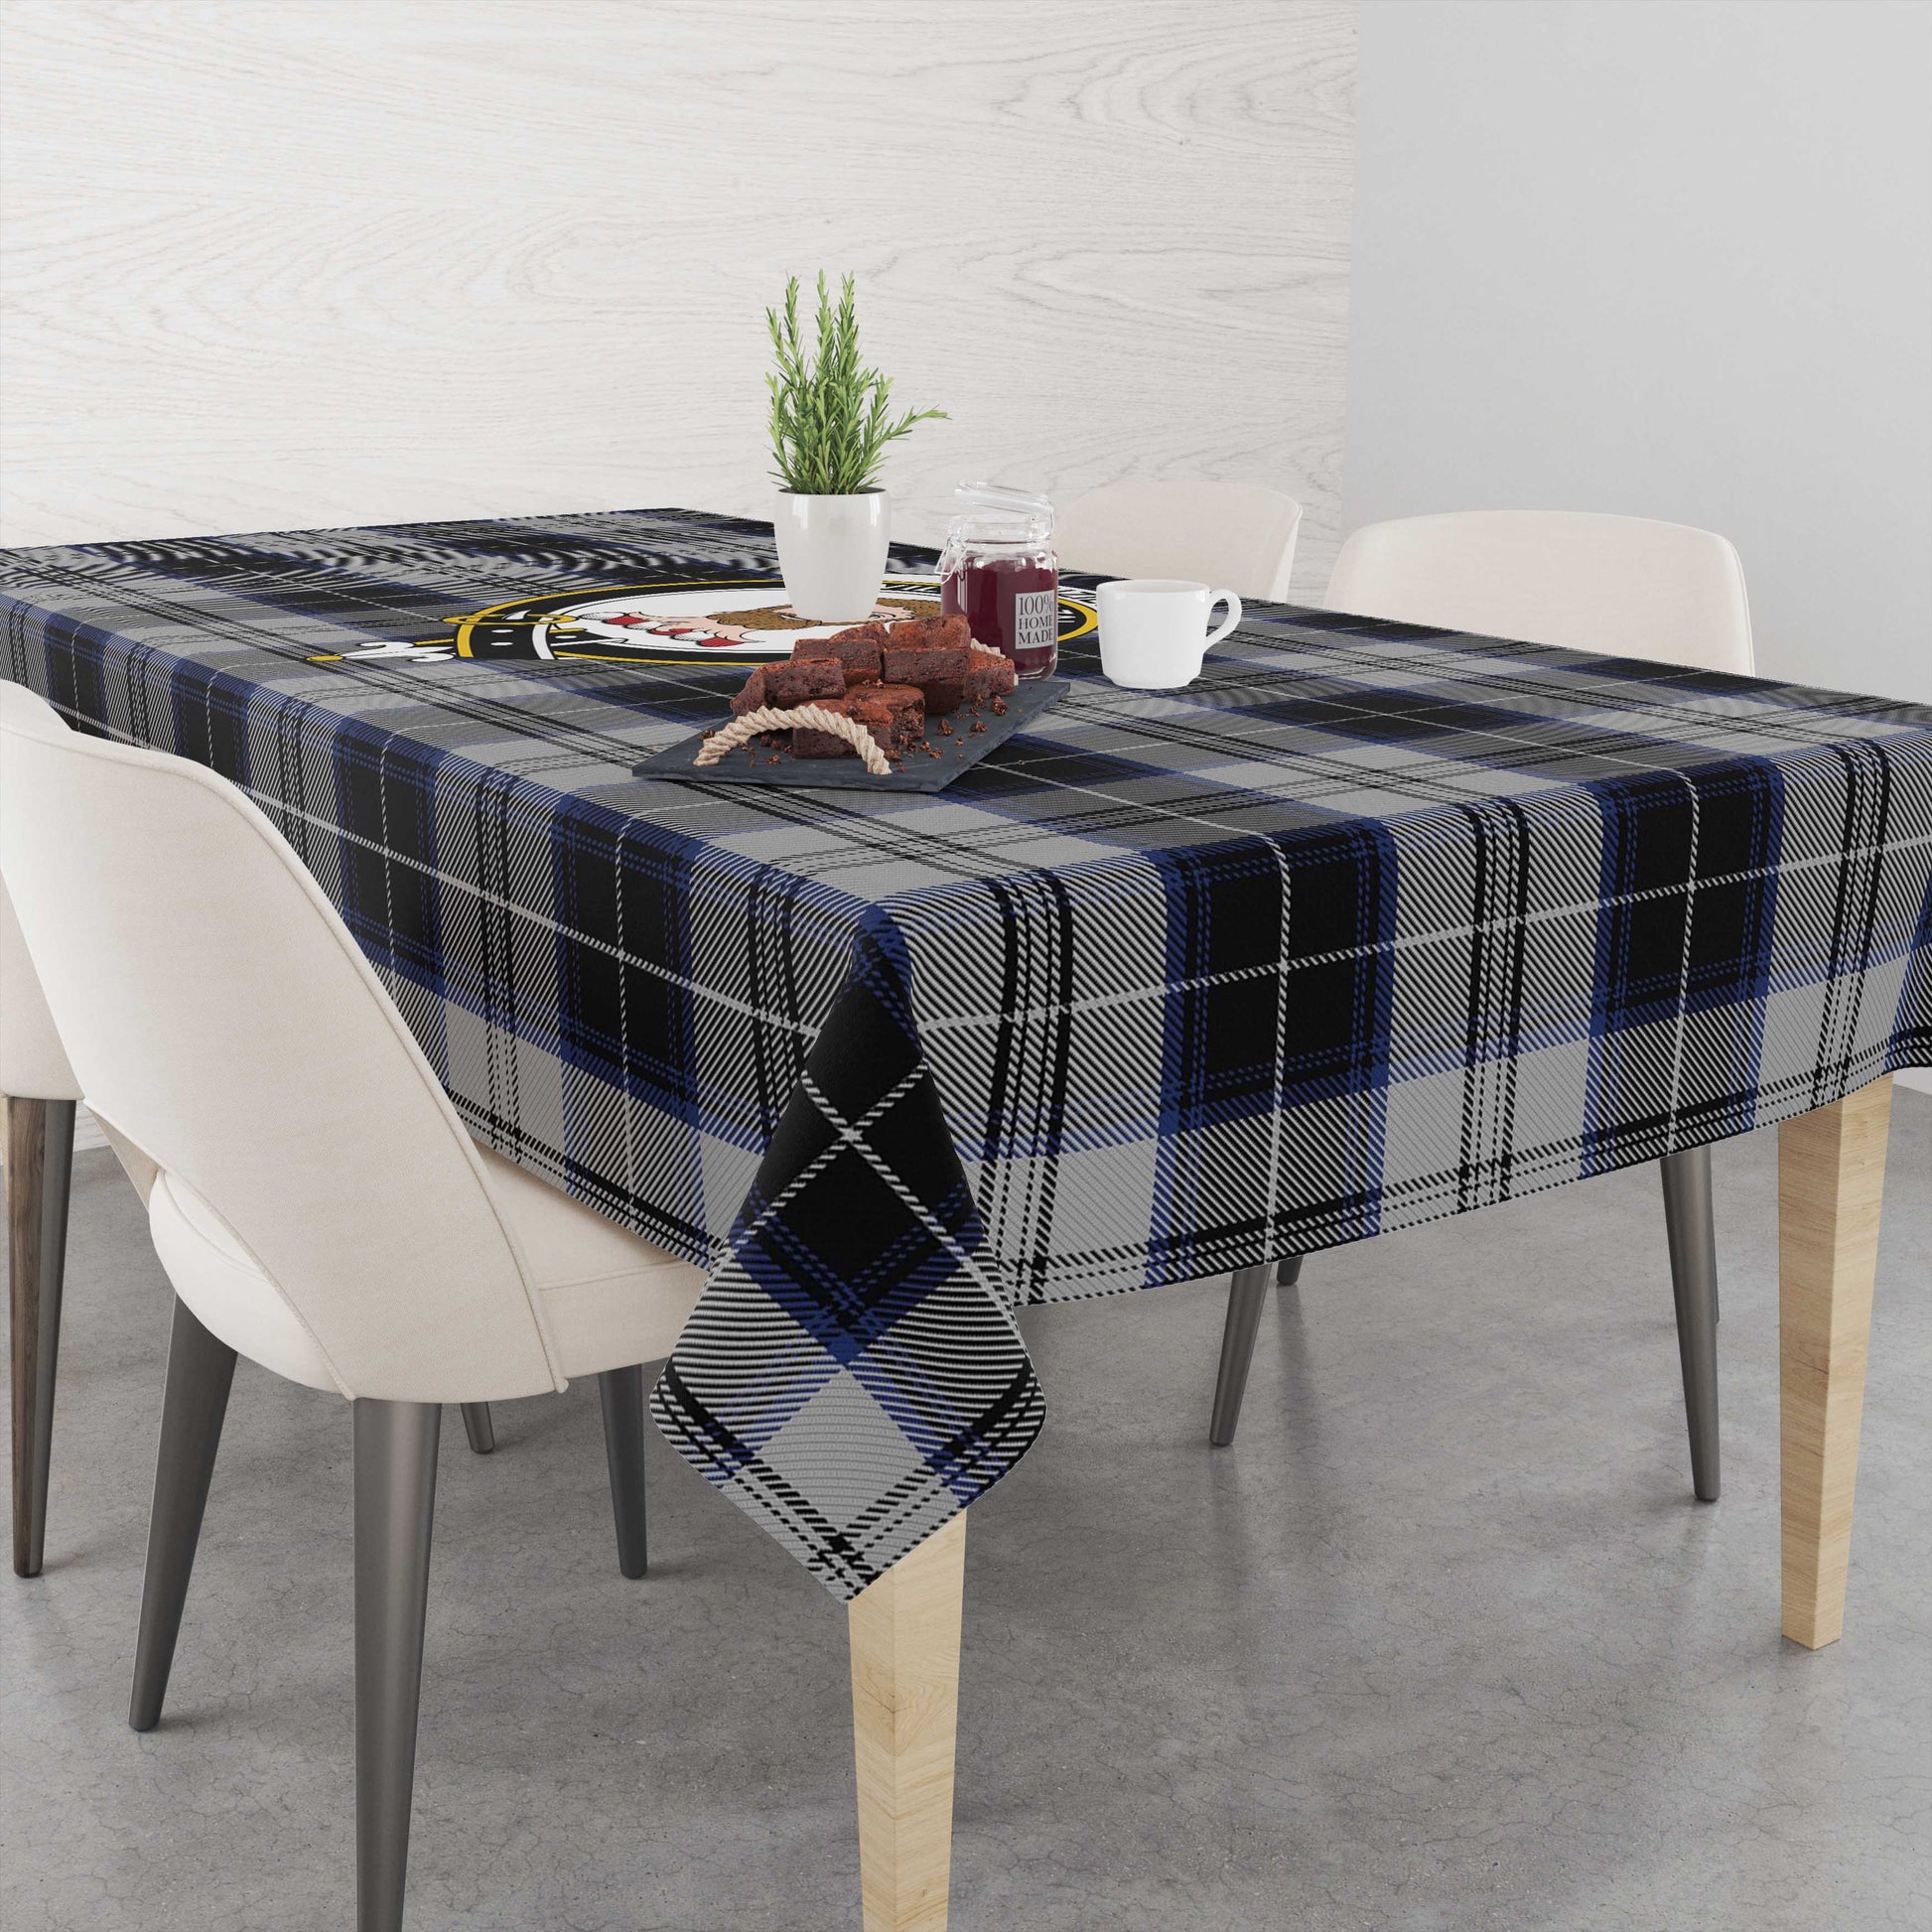 menzies-black-dress-tatan-tablecloth-with-family-crest